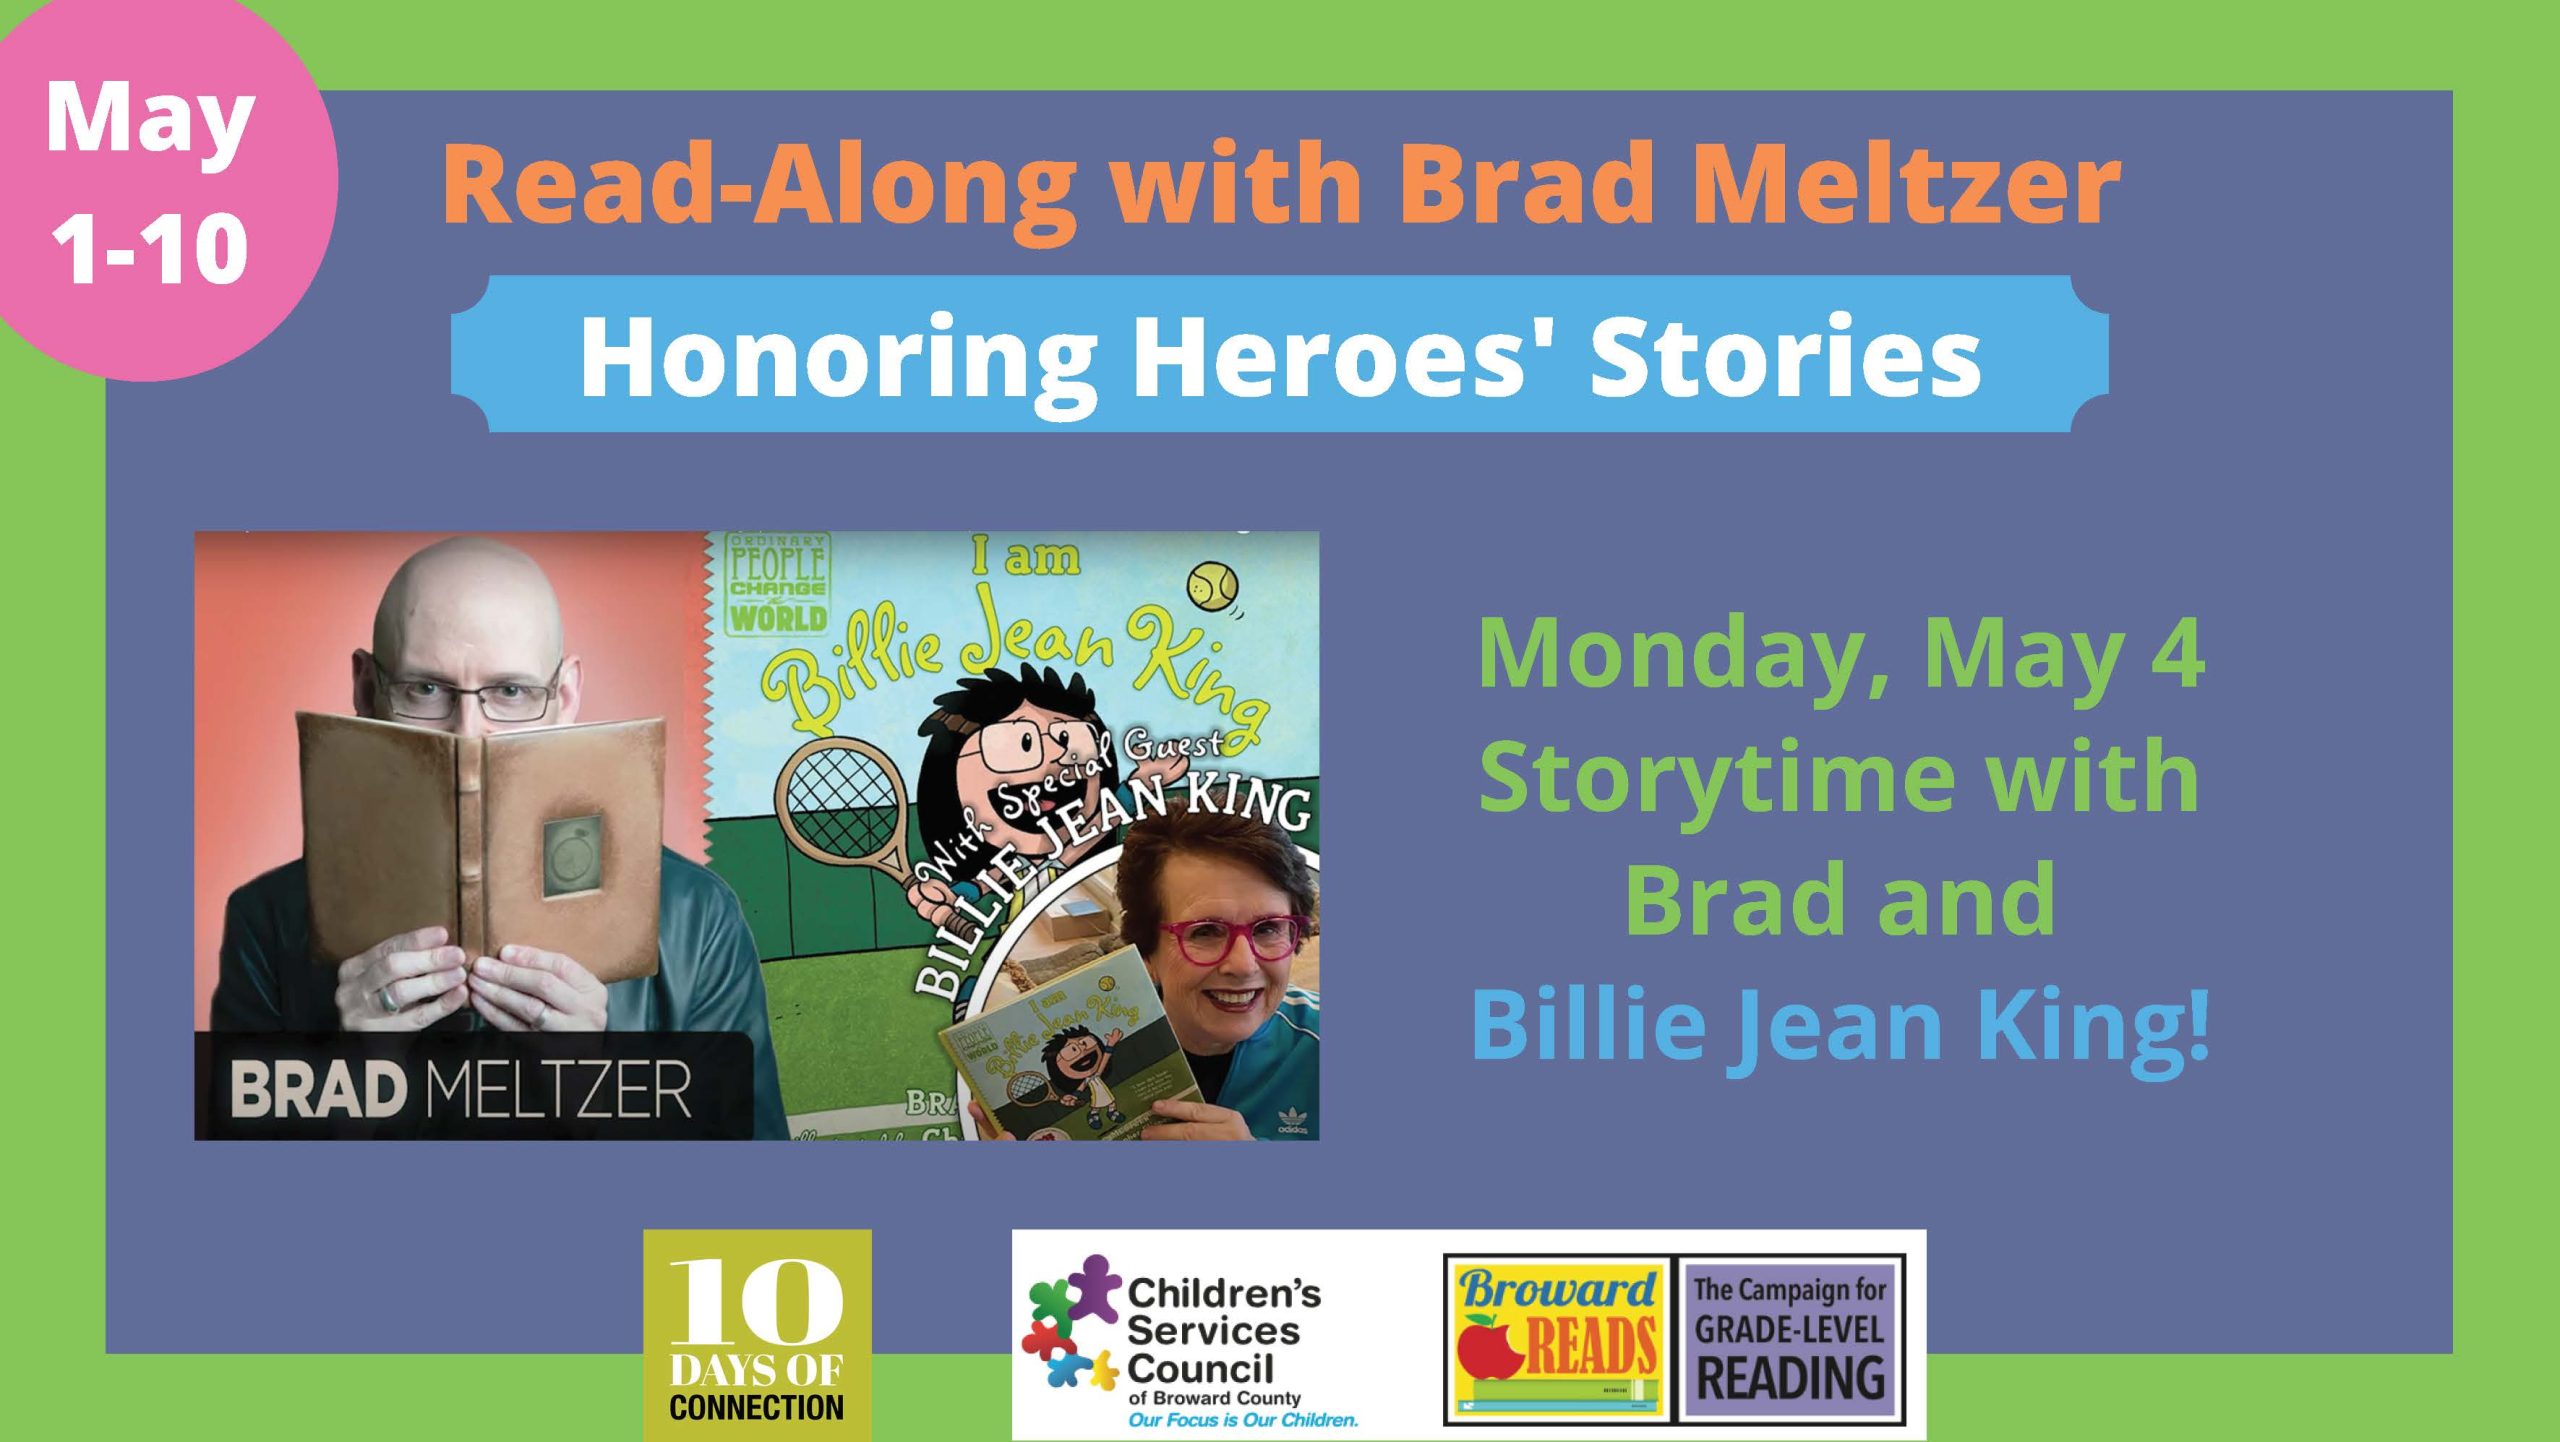 read along with brad meltzer image two